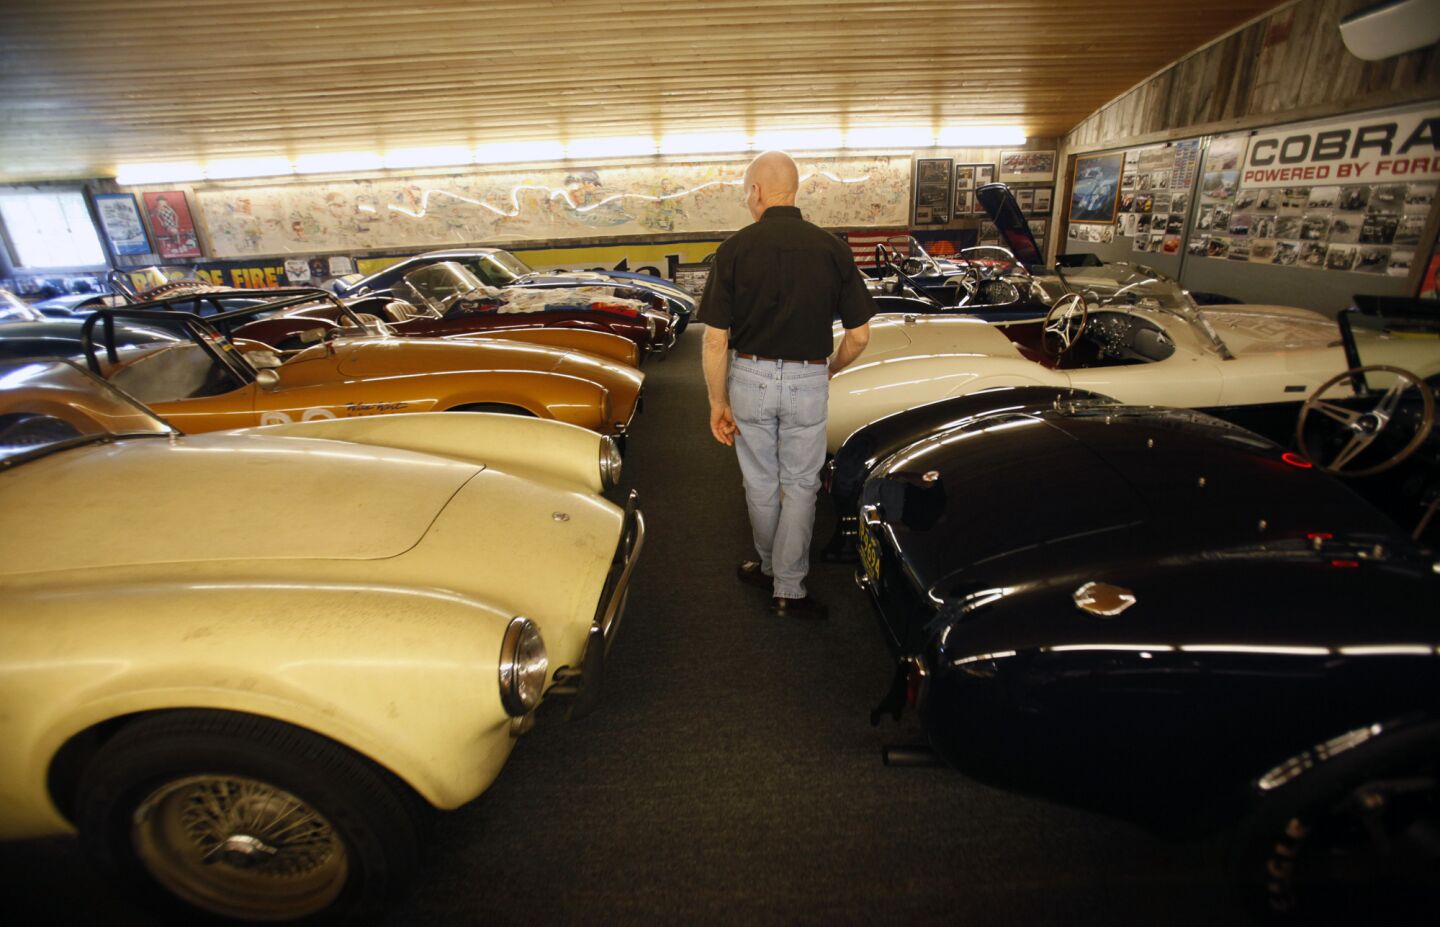 Lynn Park with his garage full of Cobra cars. Known in classic car circles as Mr. Cobra, Park has been collecting the marque since he bought his first after getting out of the Army in 1969. The first purchase got him hooked.